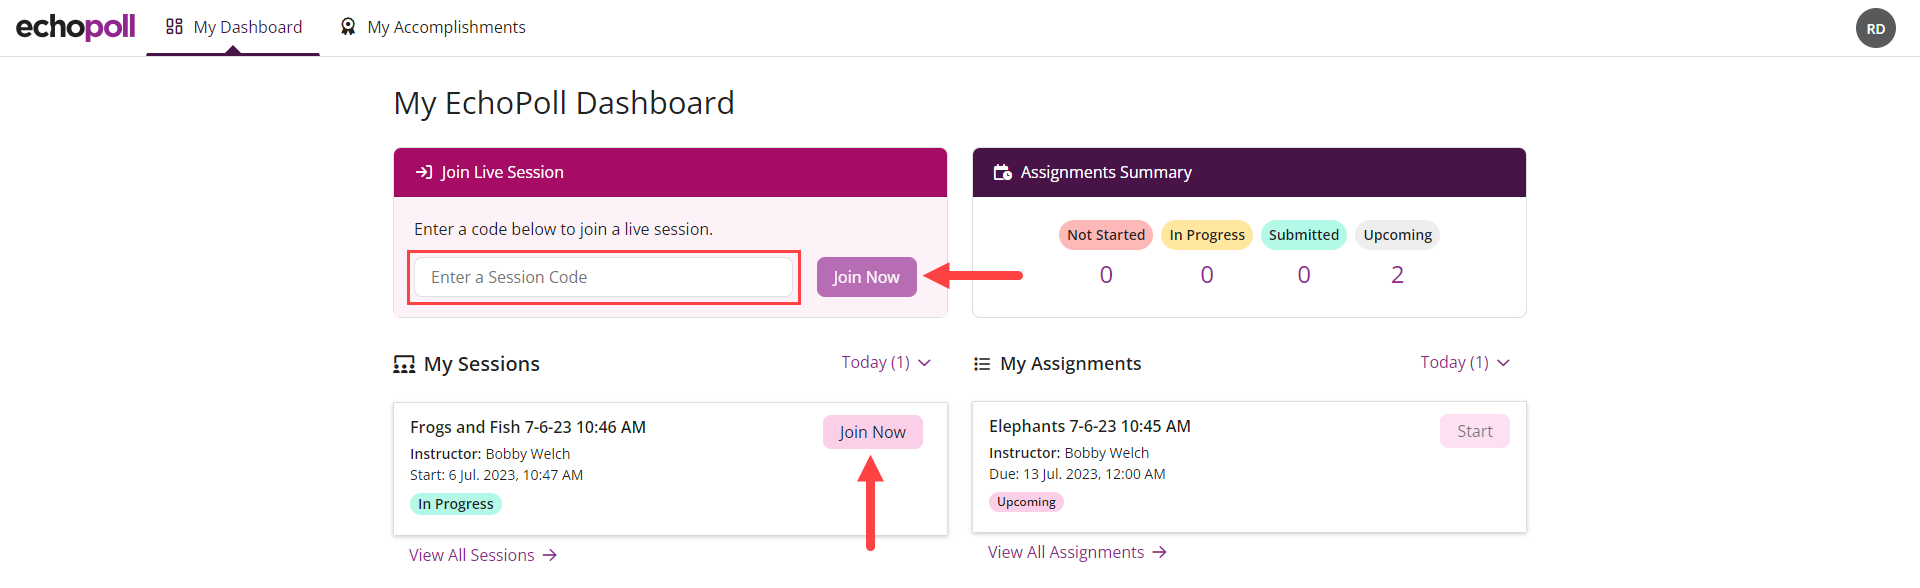 Learner Dashboard with Join Live Session and Join Session under My Sessions identified as described